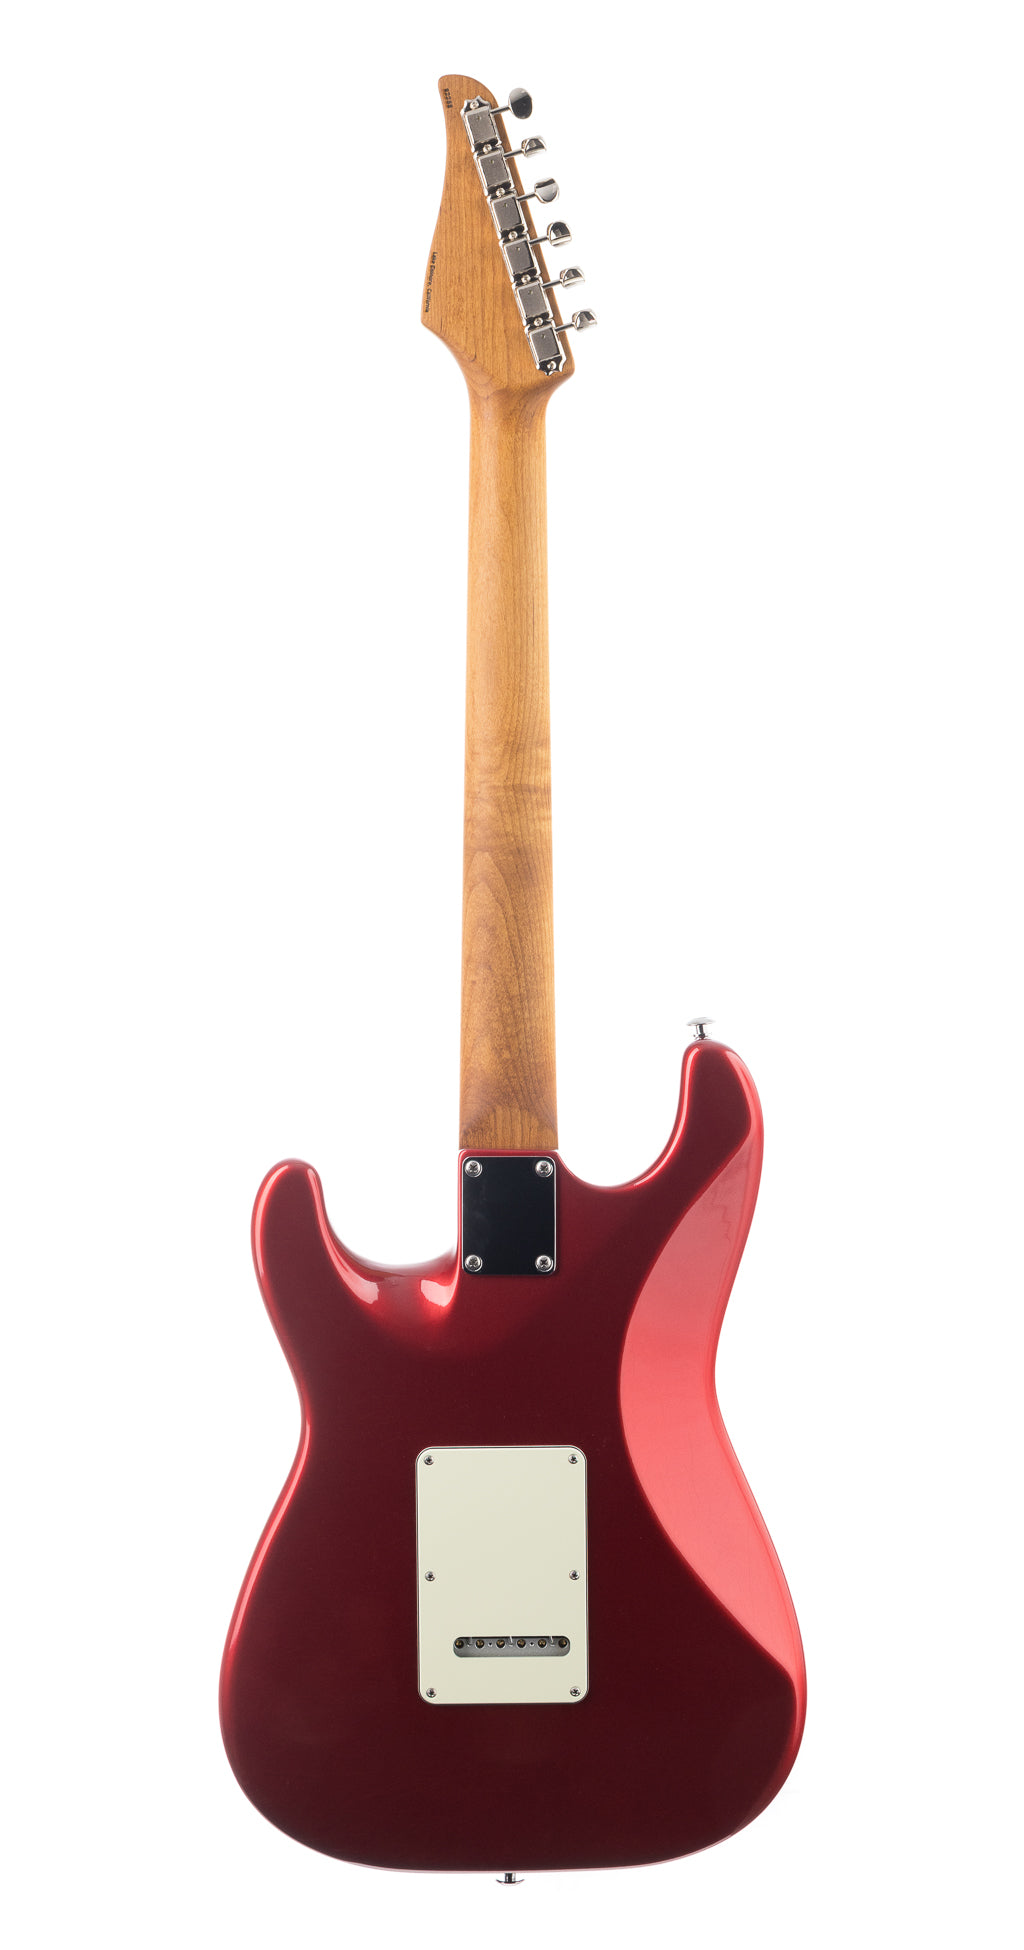 Suhr Classic S Vintage Limited Edition - Candy Apple Red (288)